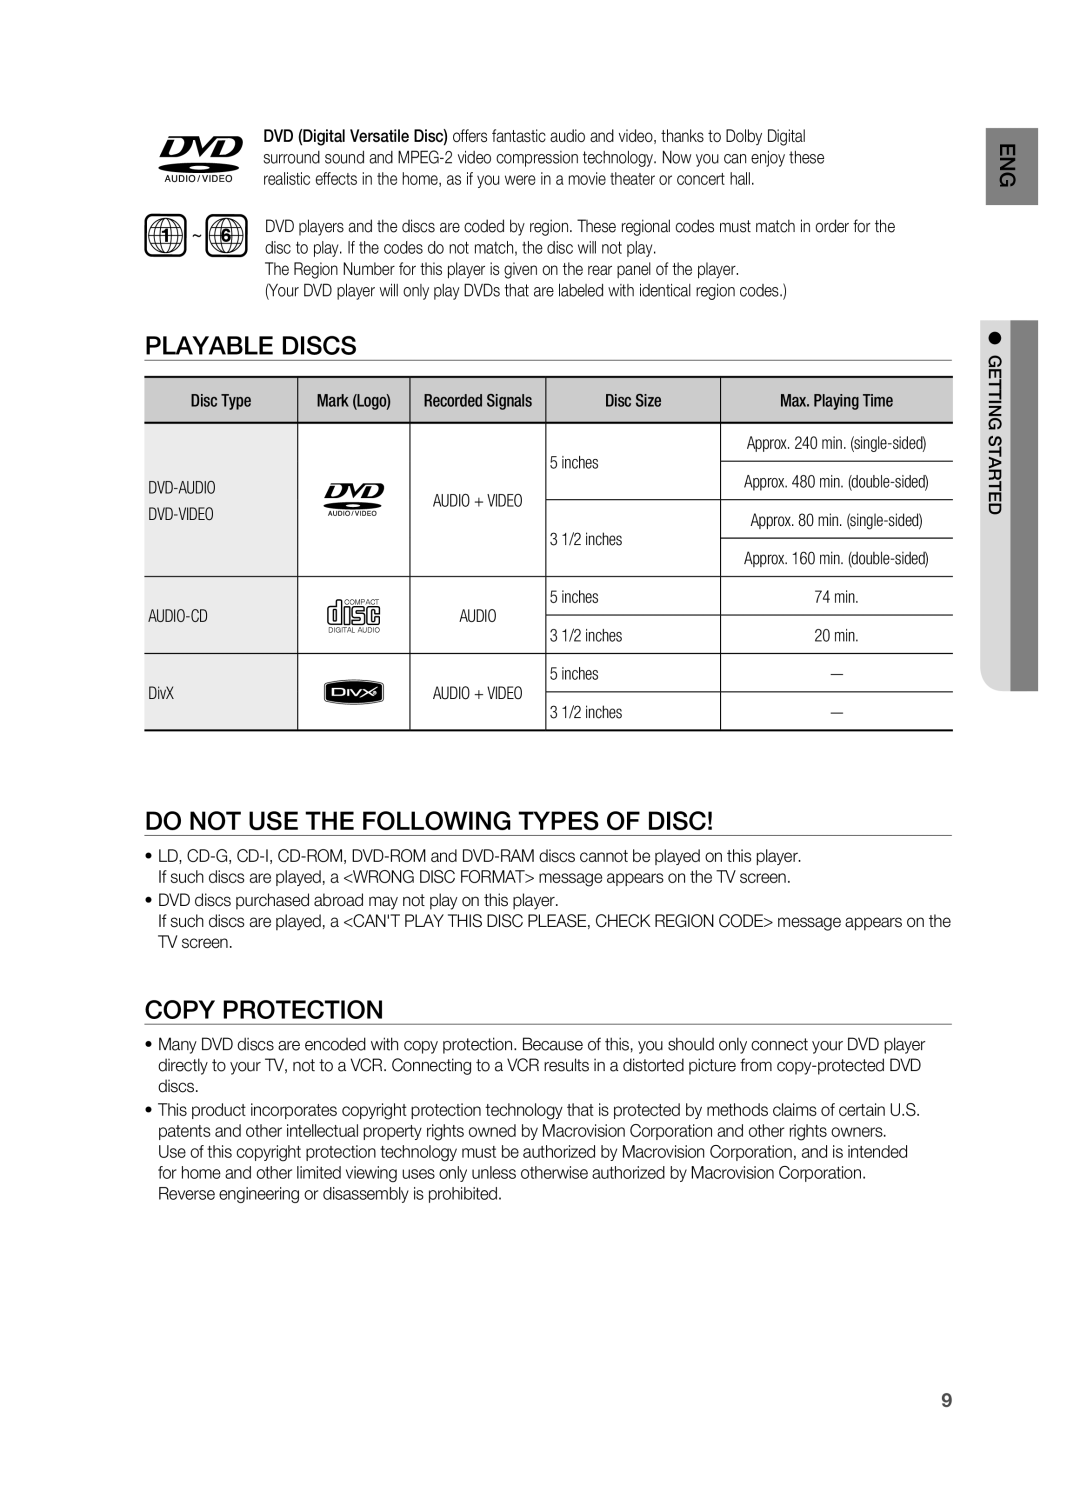 Samsung HT-TWZ315 manual Playable Discs, Do not use the following types of disc, Copy Protection 